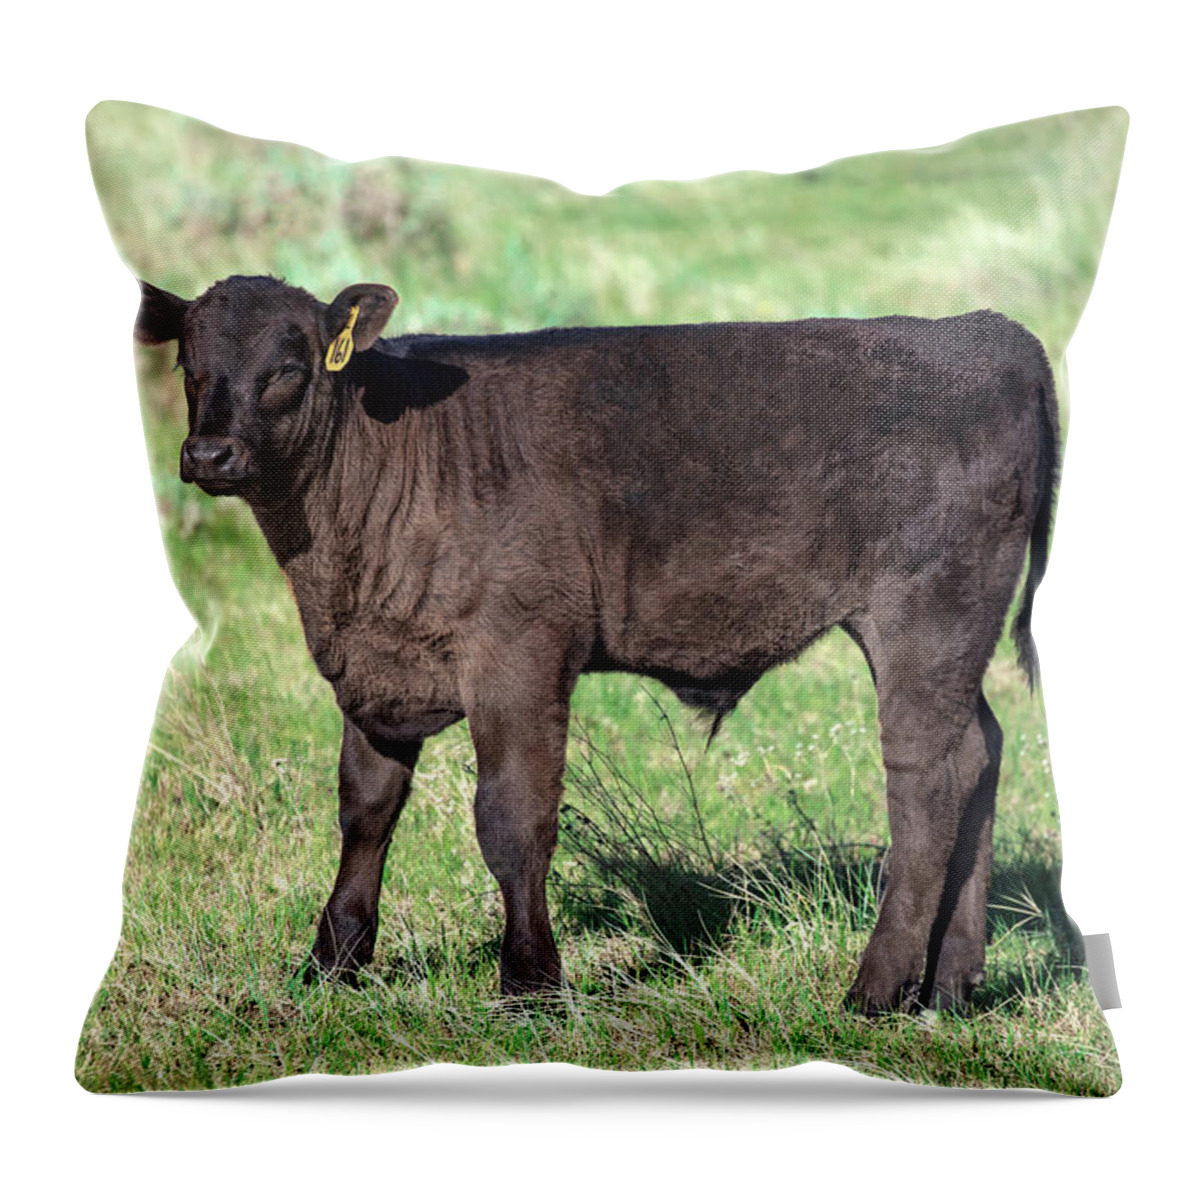 Bull Throw Pillow featuring the photograph Bull Calf by Todd Klassy